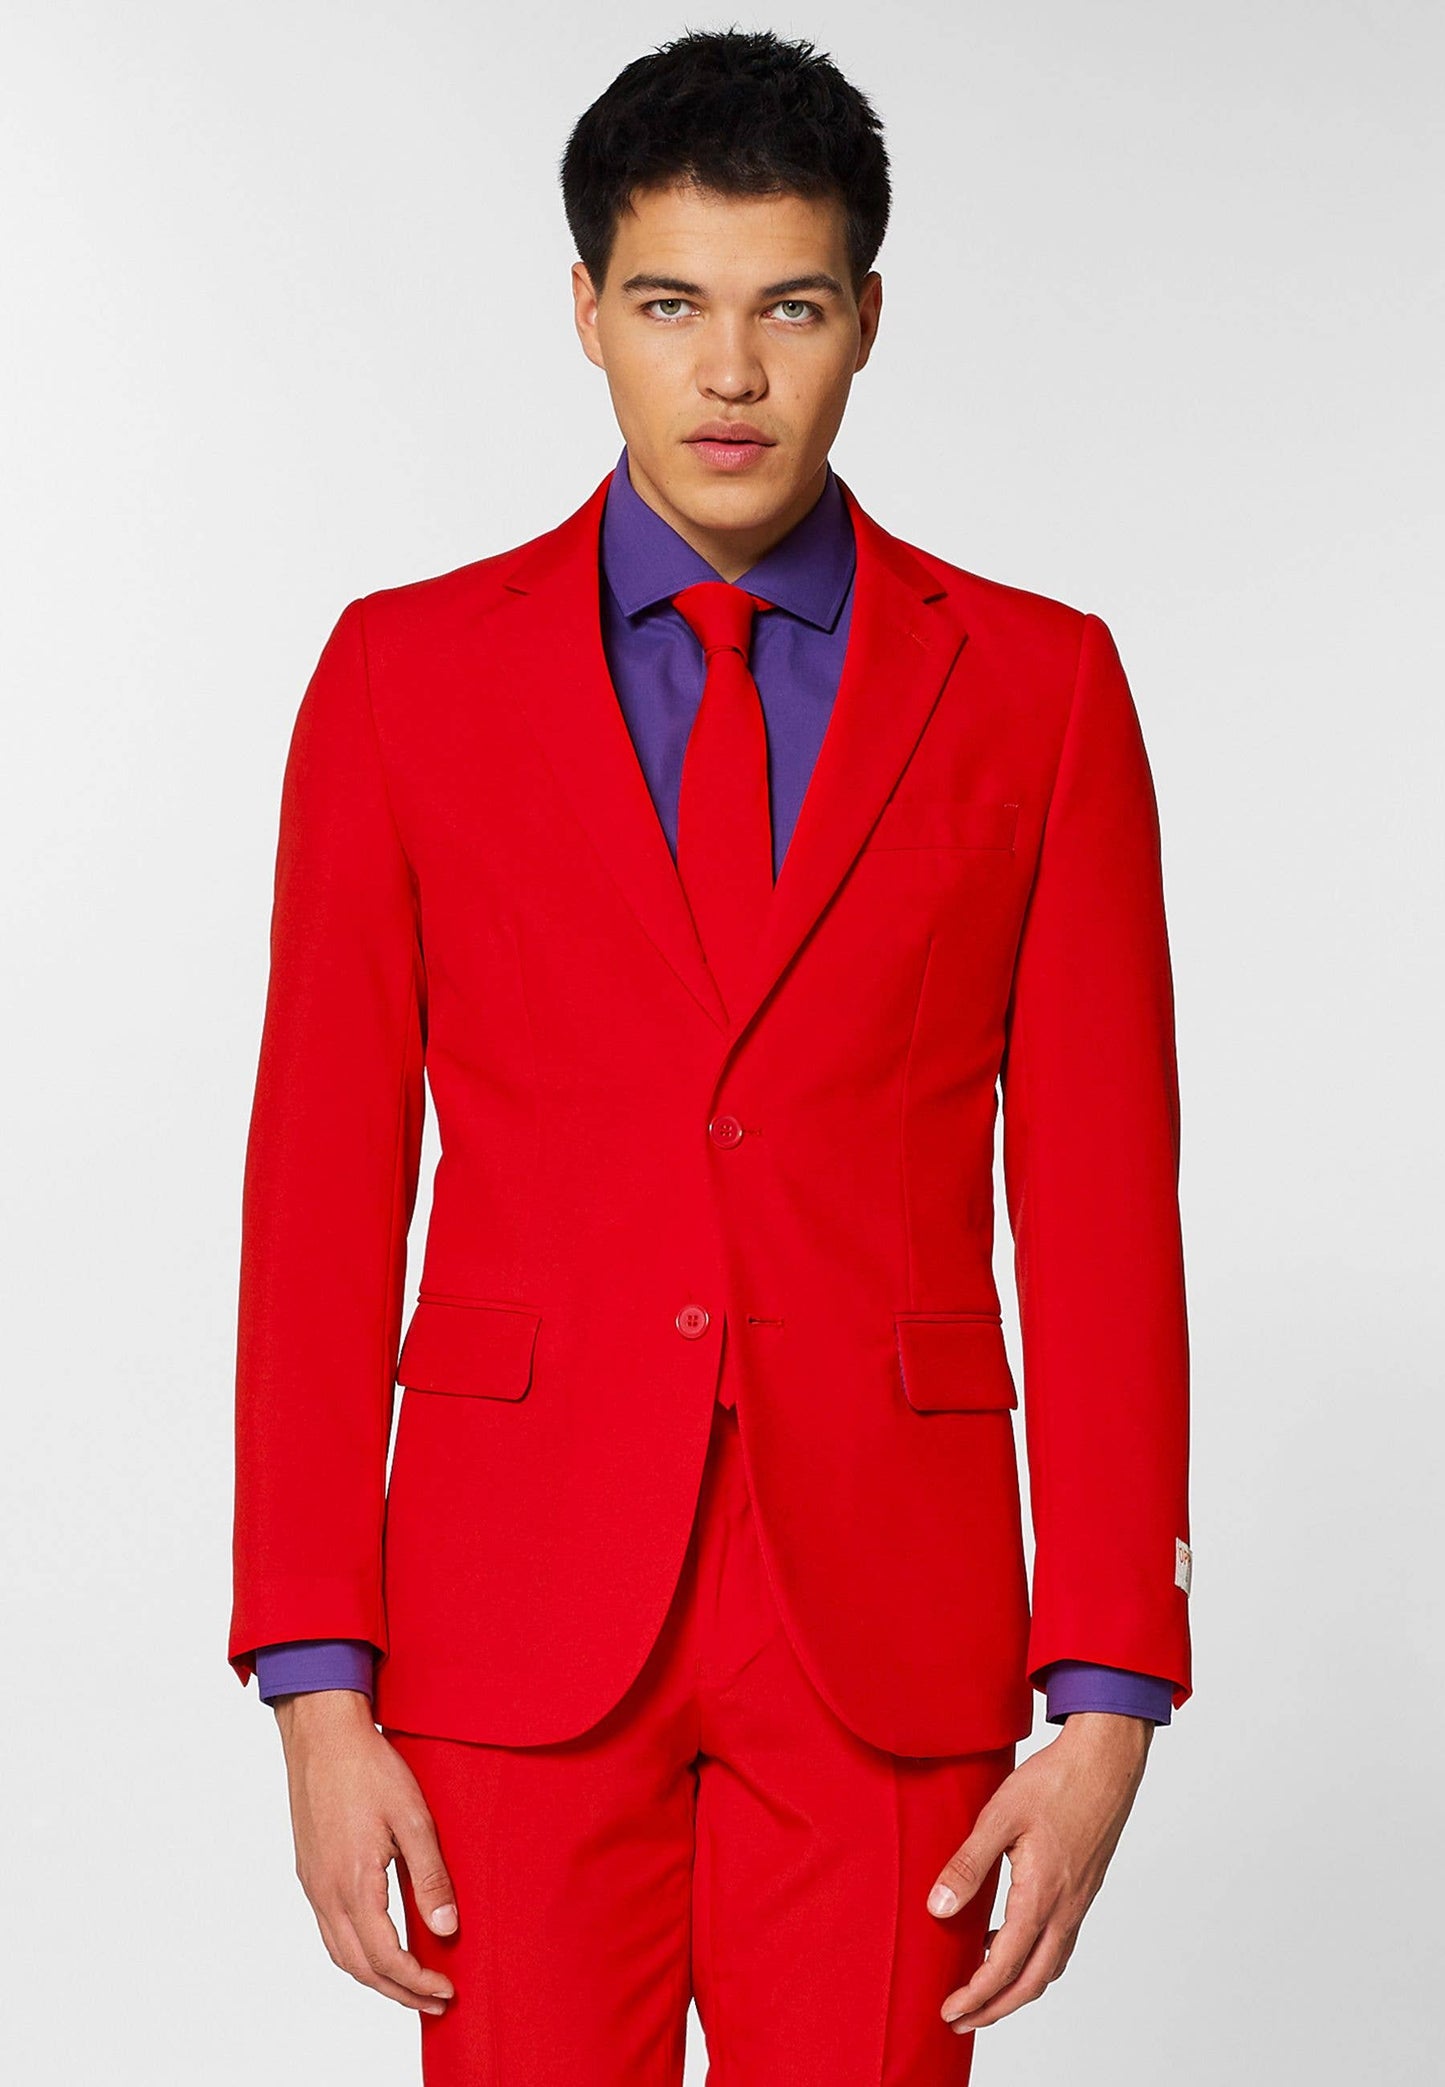 OppoSuits - US - Men's  Suit Red Incl jacket, pants and tie